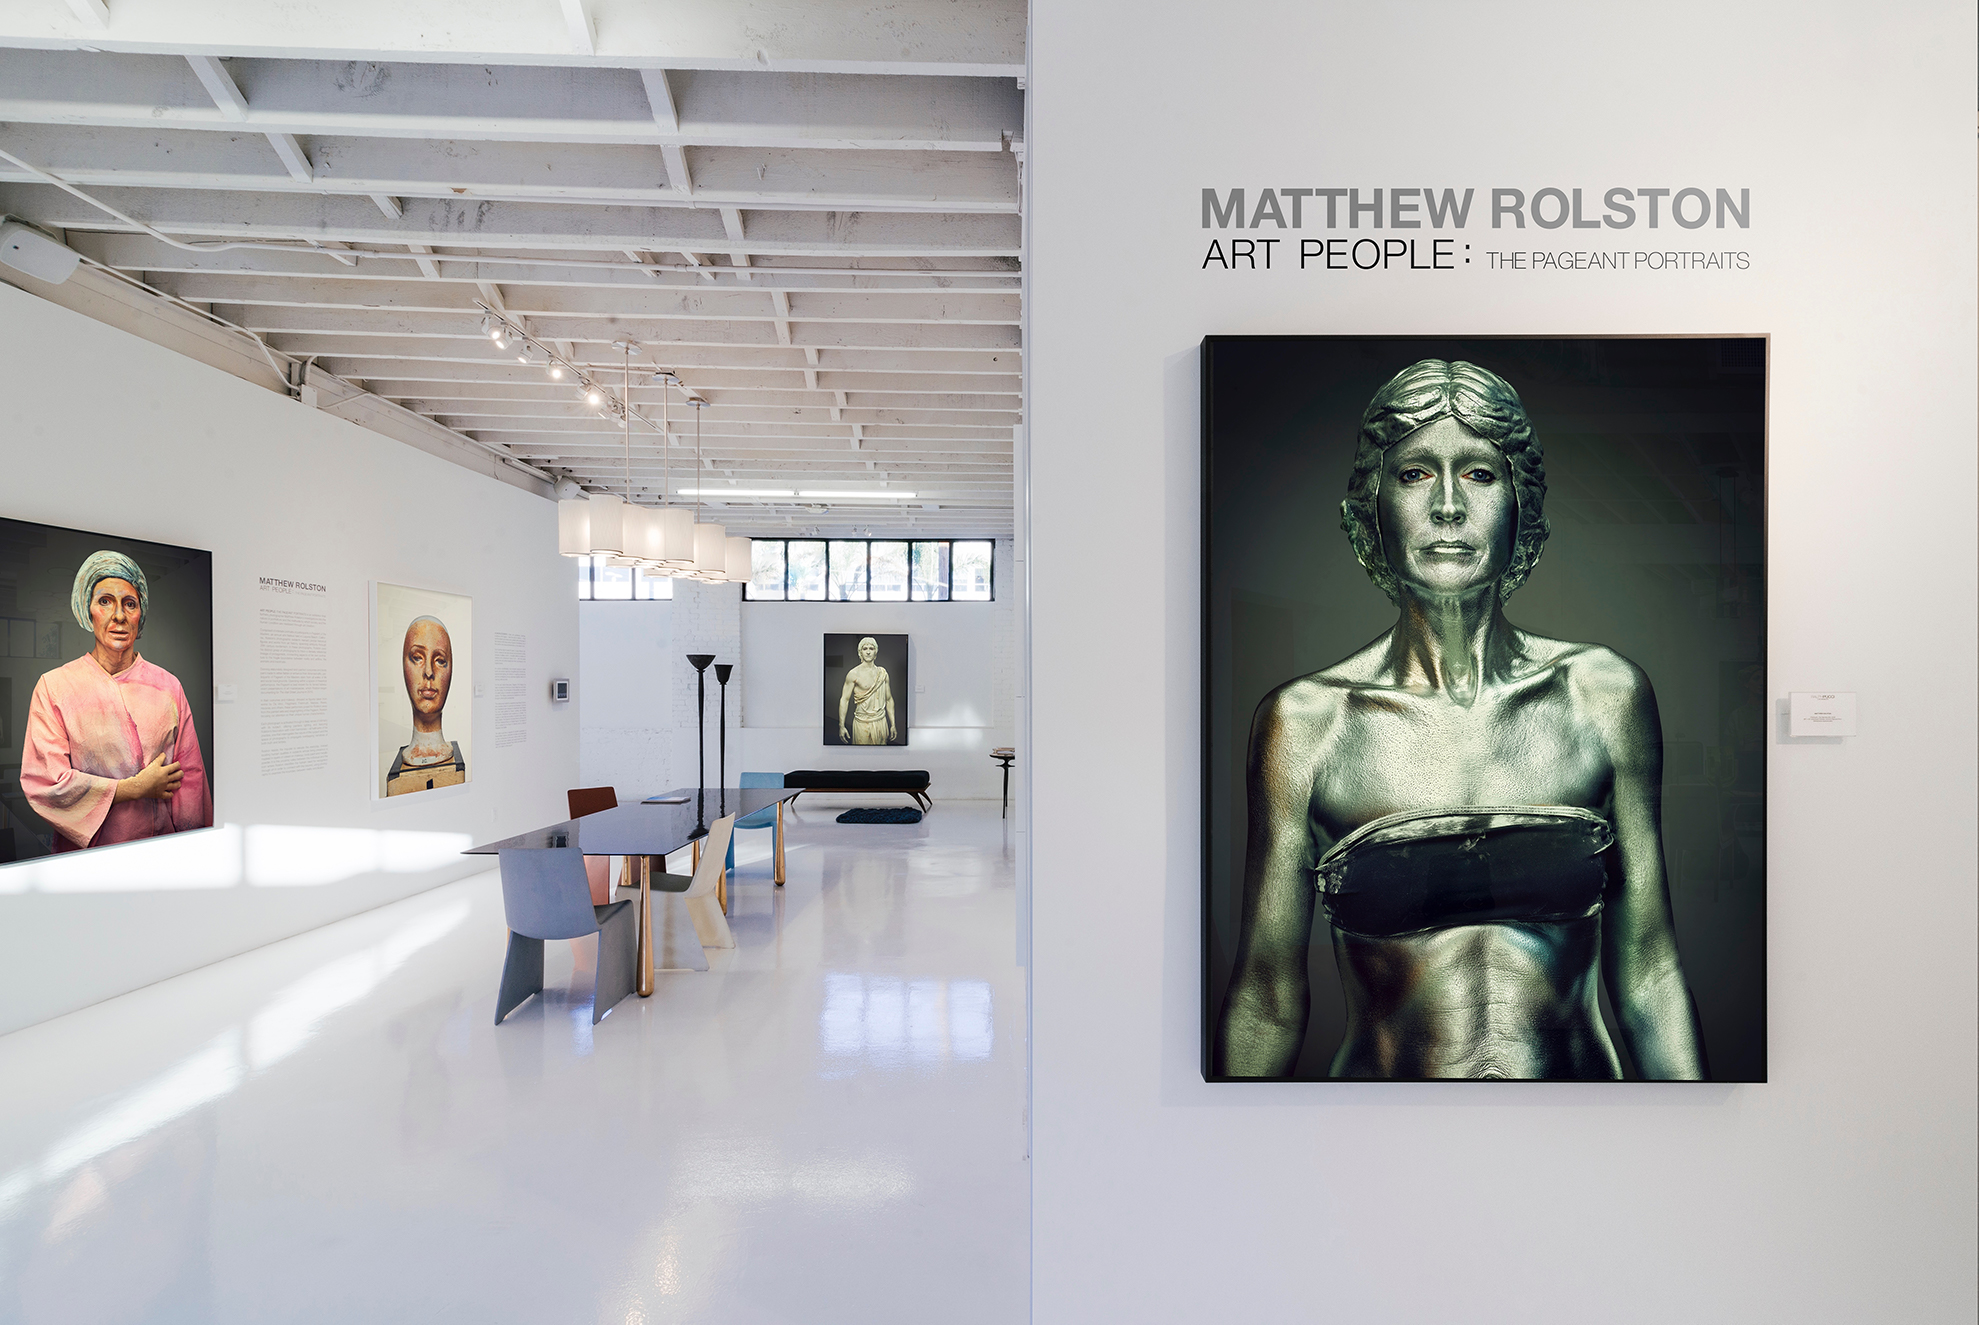 Matthew Rolston, Art People: The Pageant Portraits, Exhibition at Ralph Pucci, Los Angeles, installation view. Photographed by Craig Kirk.